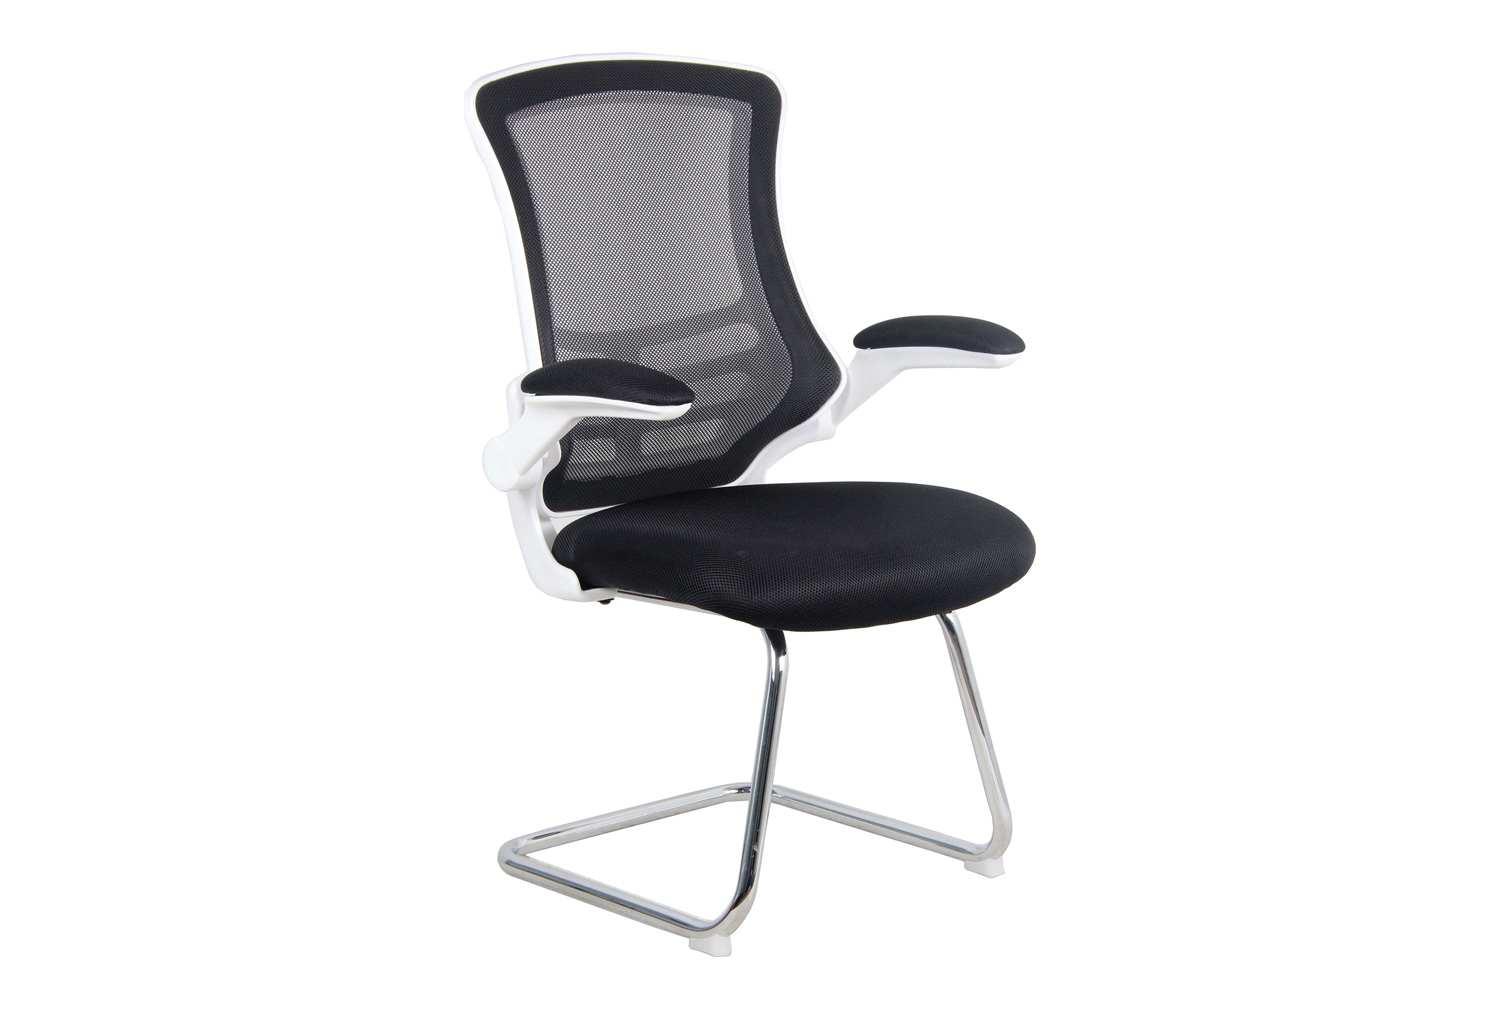 Moon Mesh Back Visitor Office Chair With Chrome Frame (Black), Fully Installed